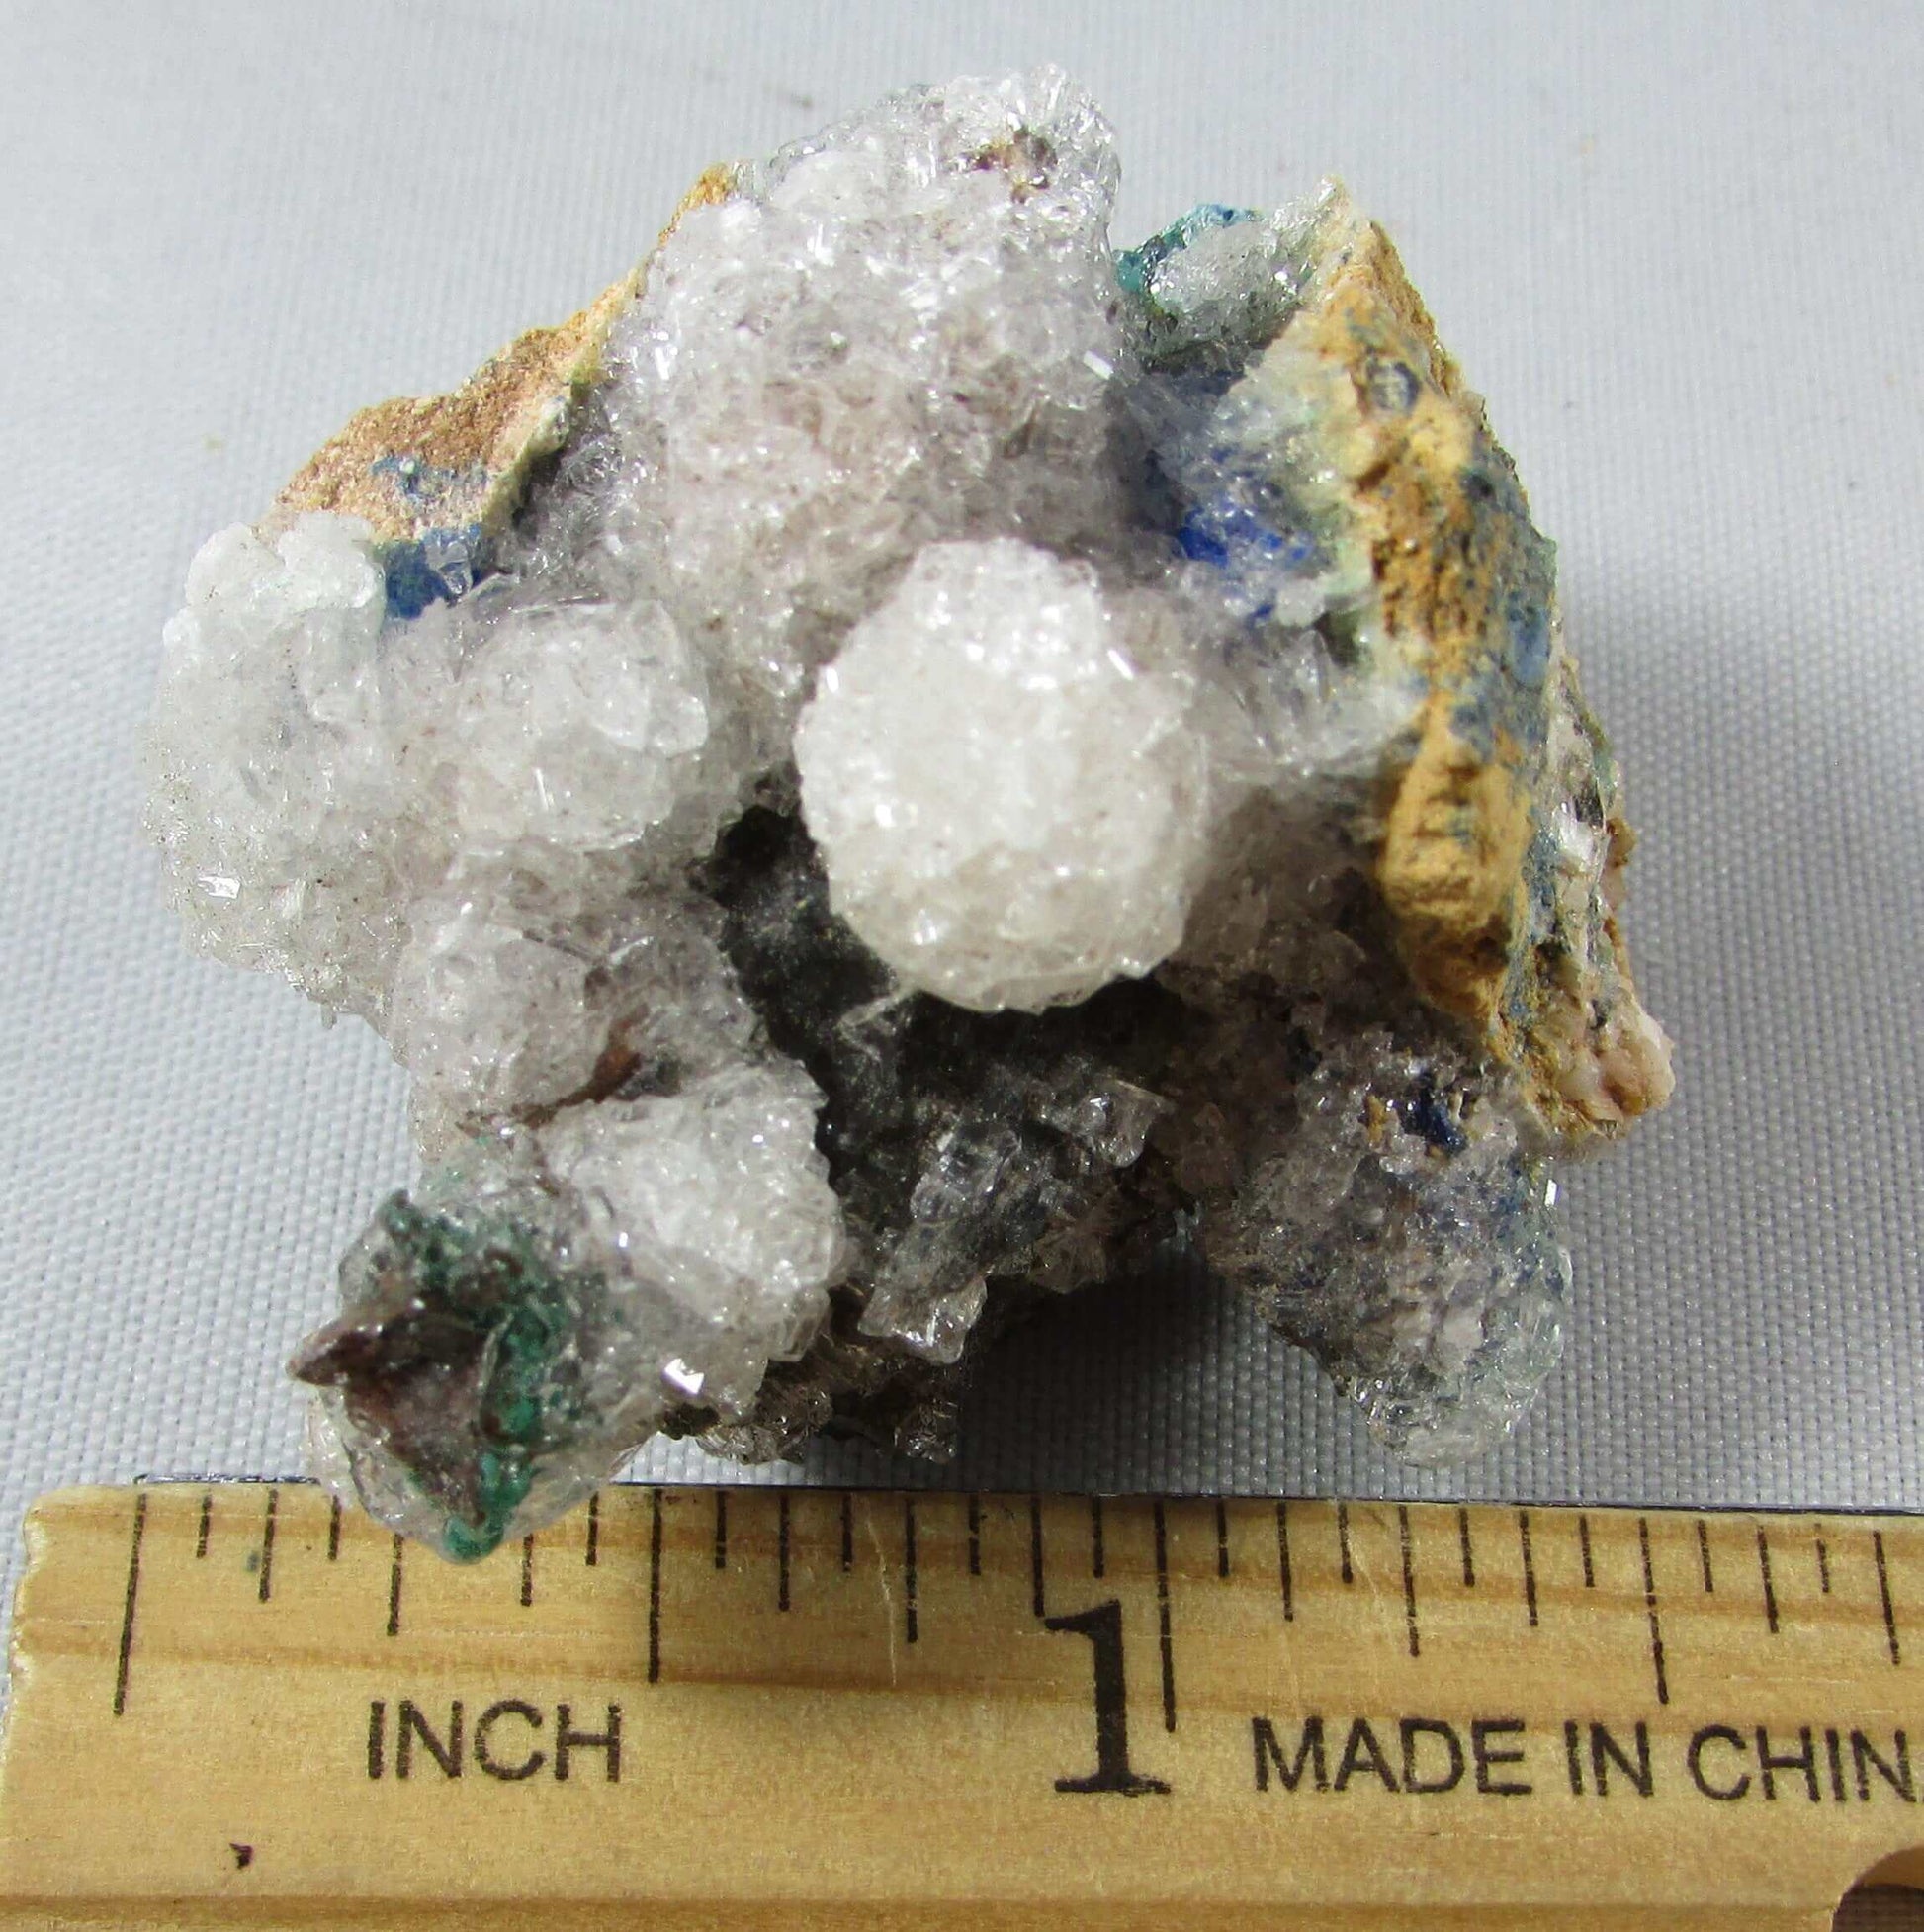 dolomite rosasite rough crystal morocco minerals